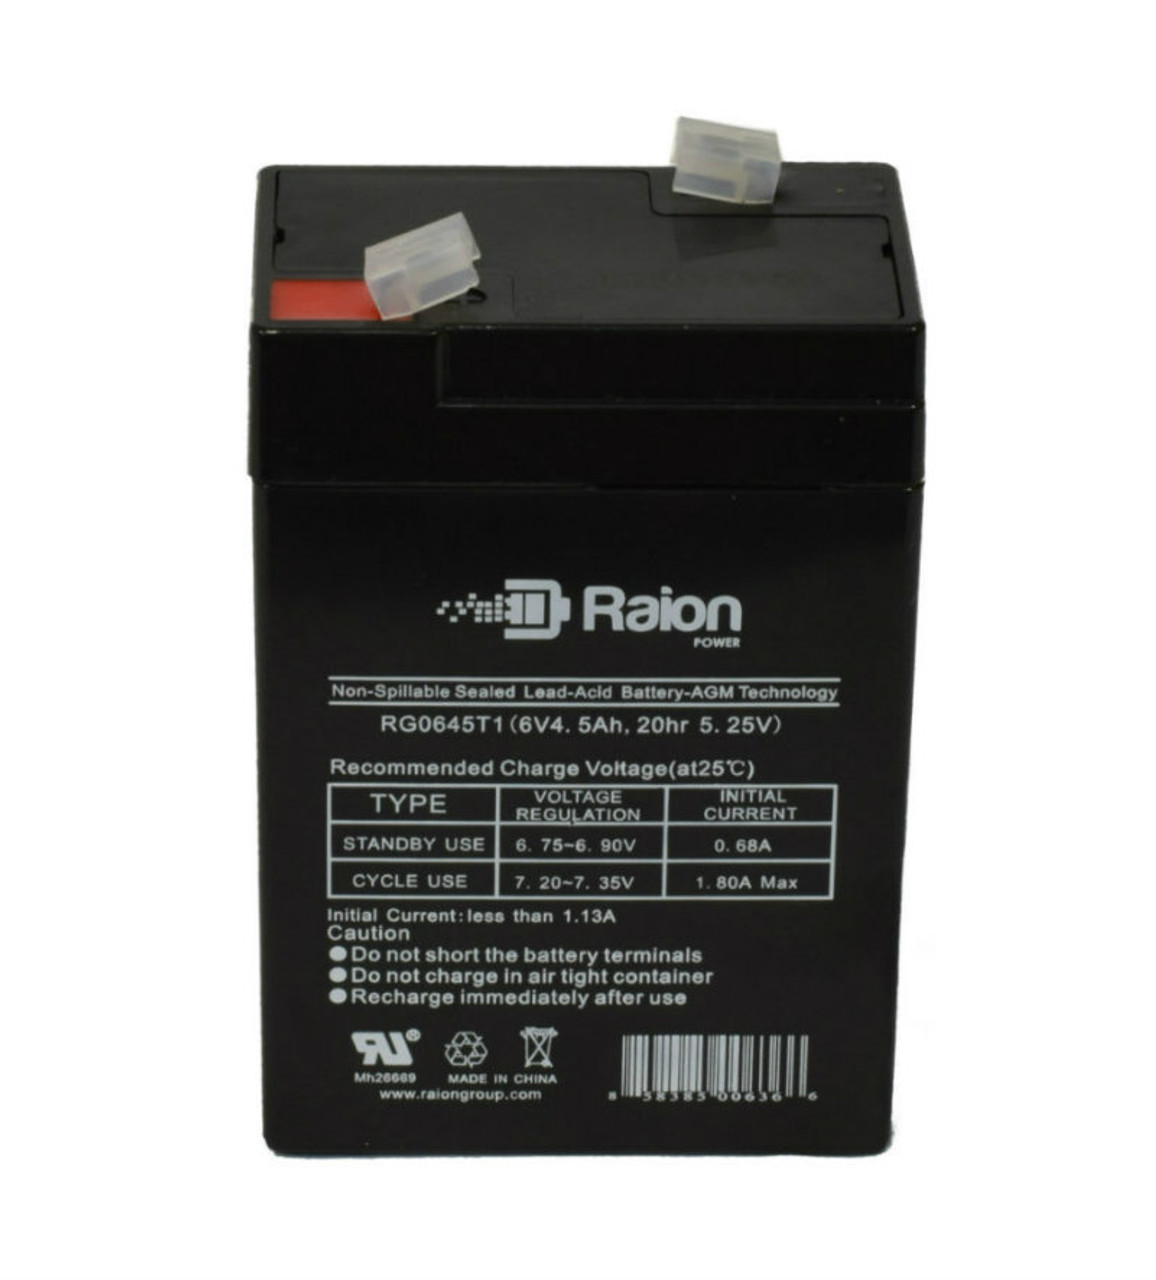 Raion Power RG0645T1 Replacement Battery Cartridge for Double Tech DB6-4